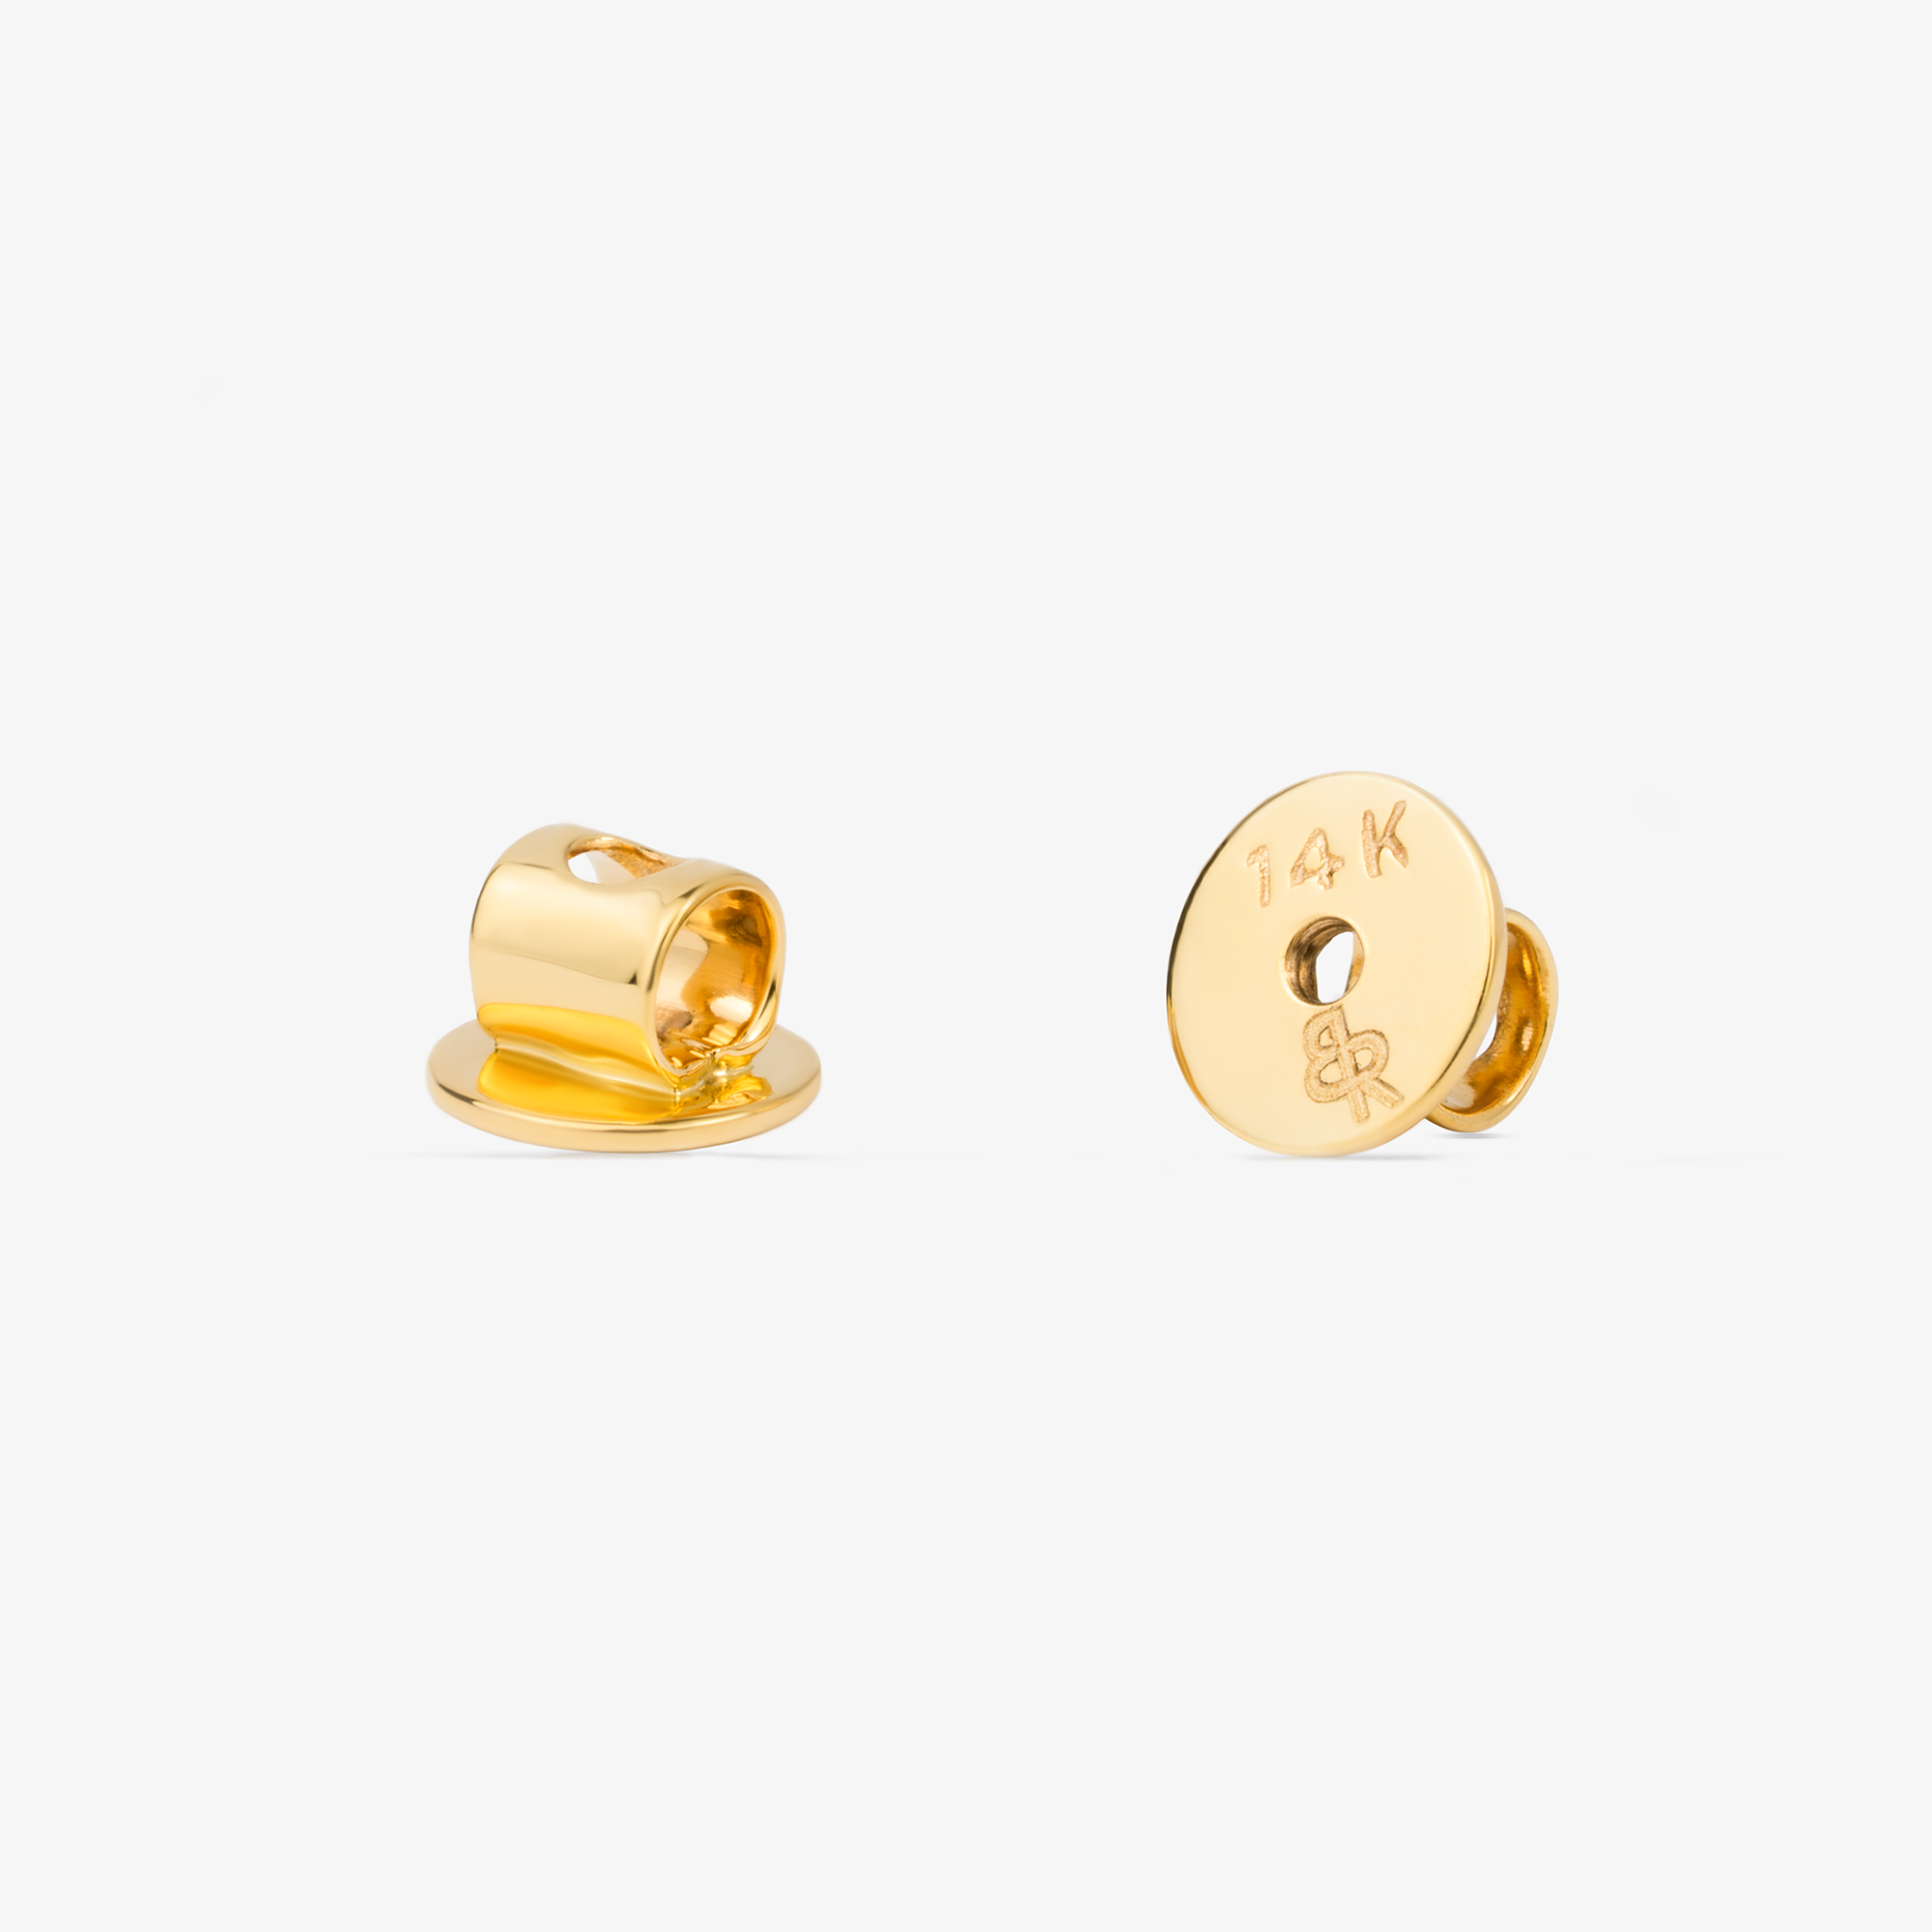 Square Stud Earrings In 14K Solid Yellow Gold With Diamonds